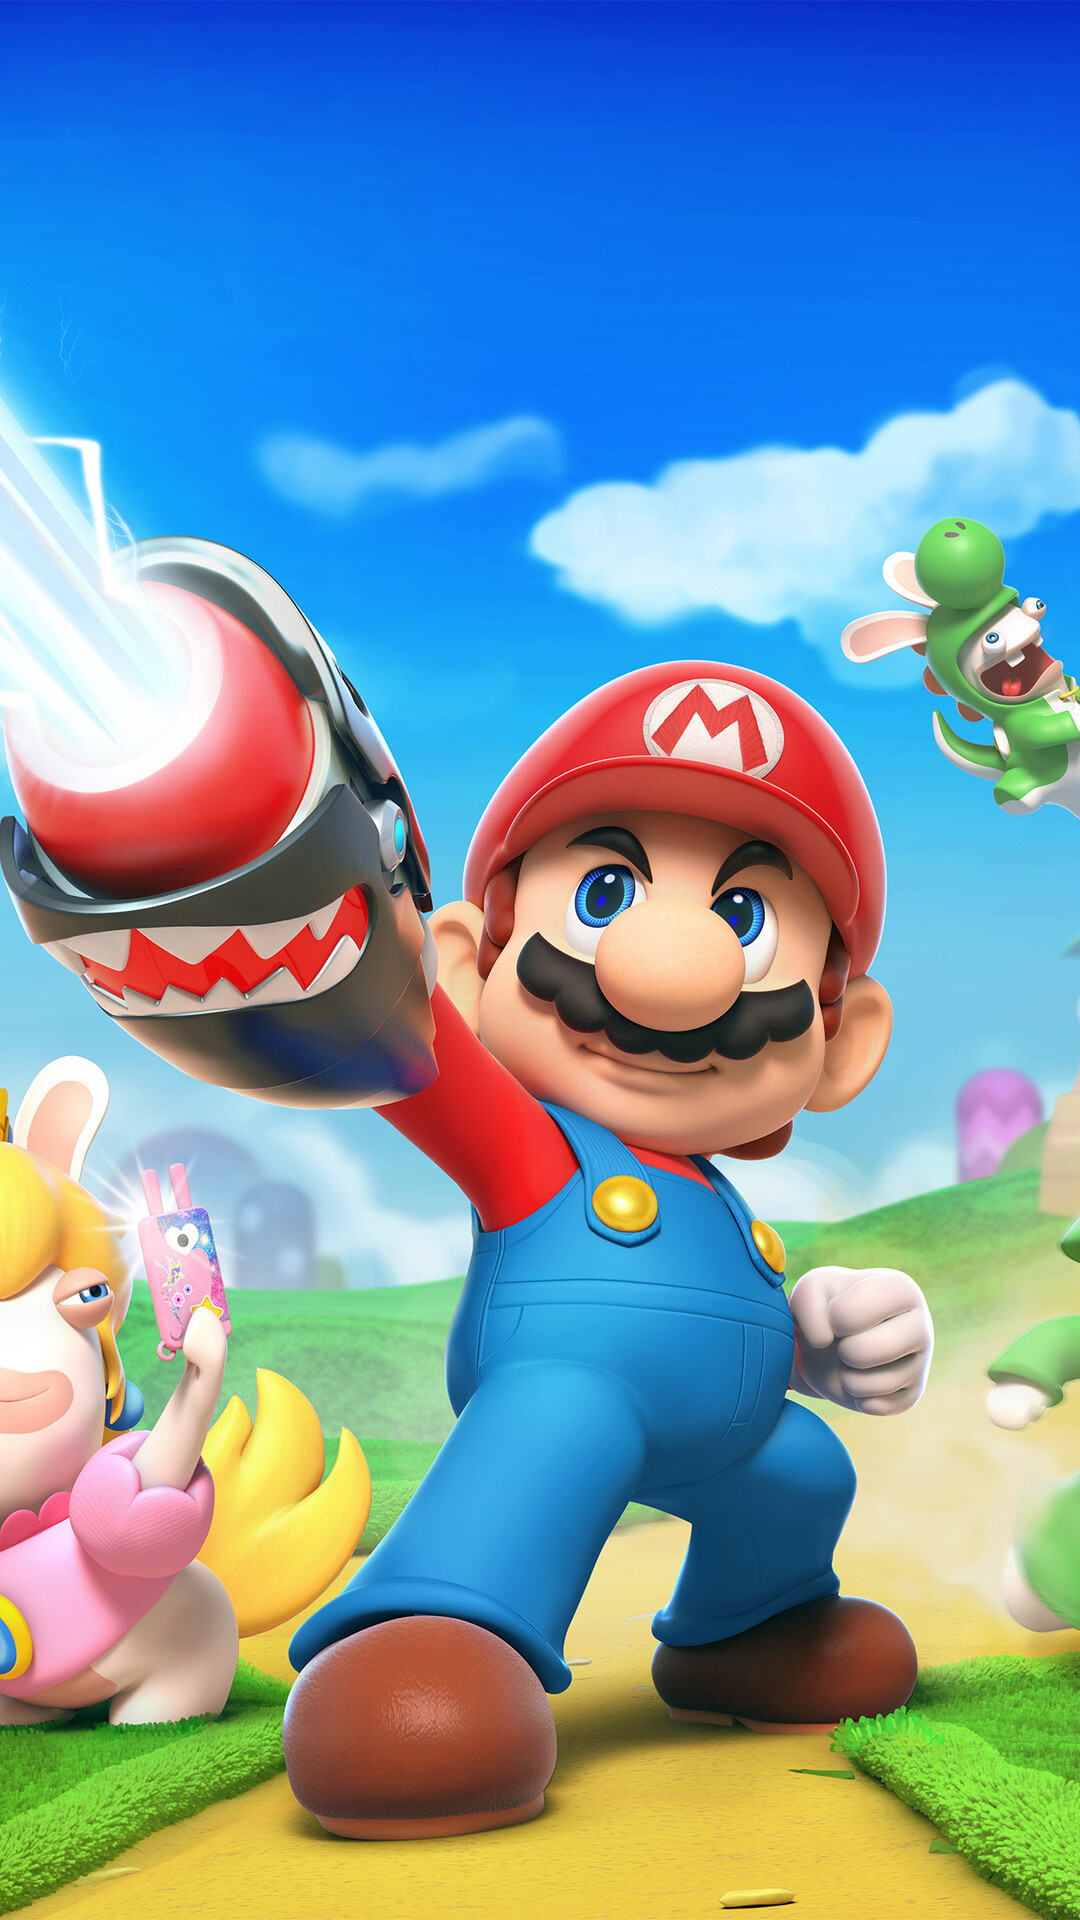 Mario wallpapers, Kingdom Battle characters, High-definition images, Gaming wallpapers, 1080x1920 Full HD Phone